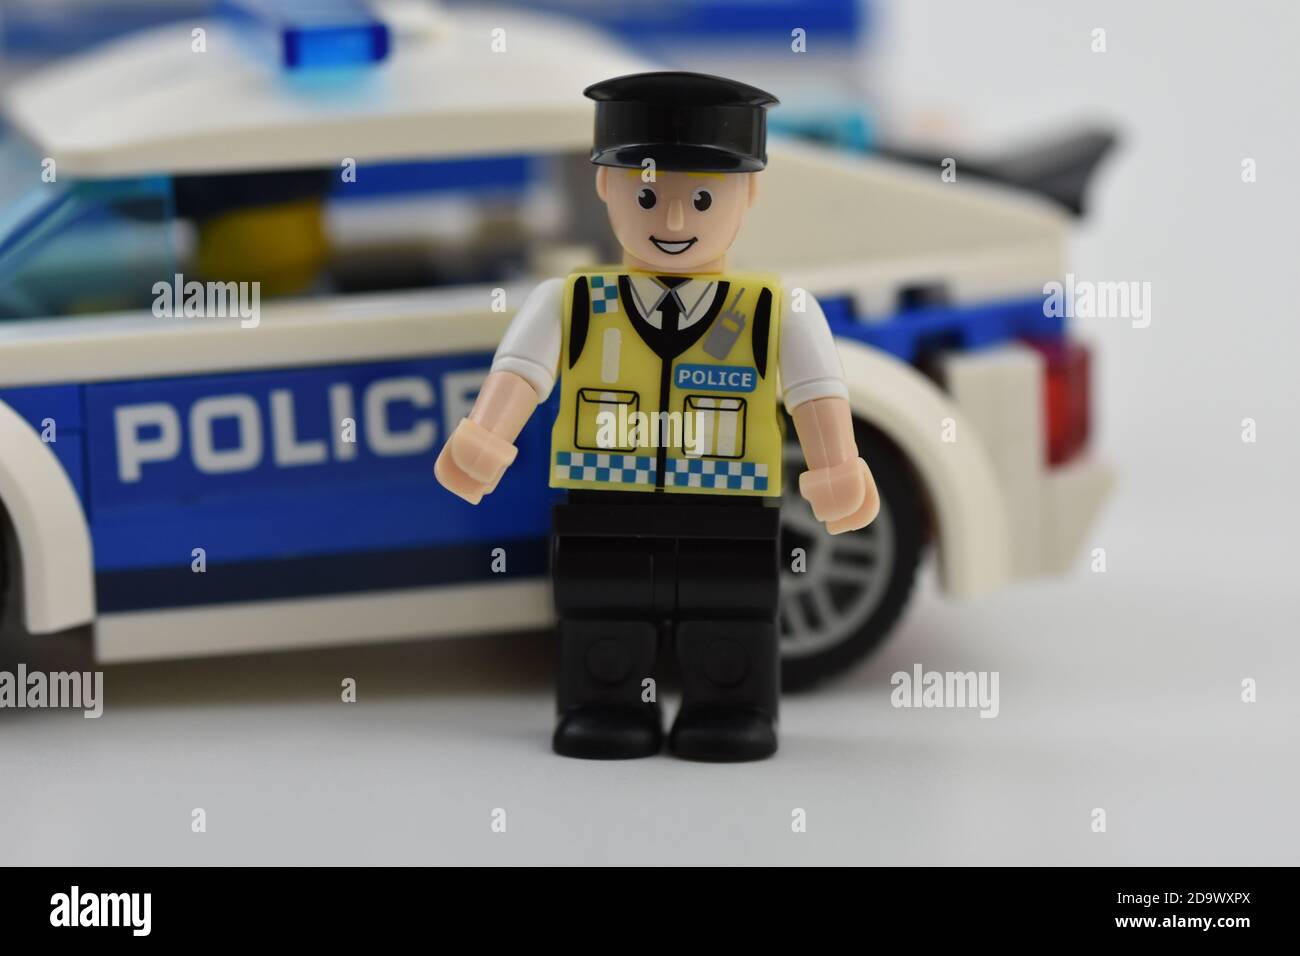 A Blox Policeman minifigure stood in Front of a toy Lego Police car Stock Photo